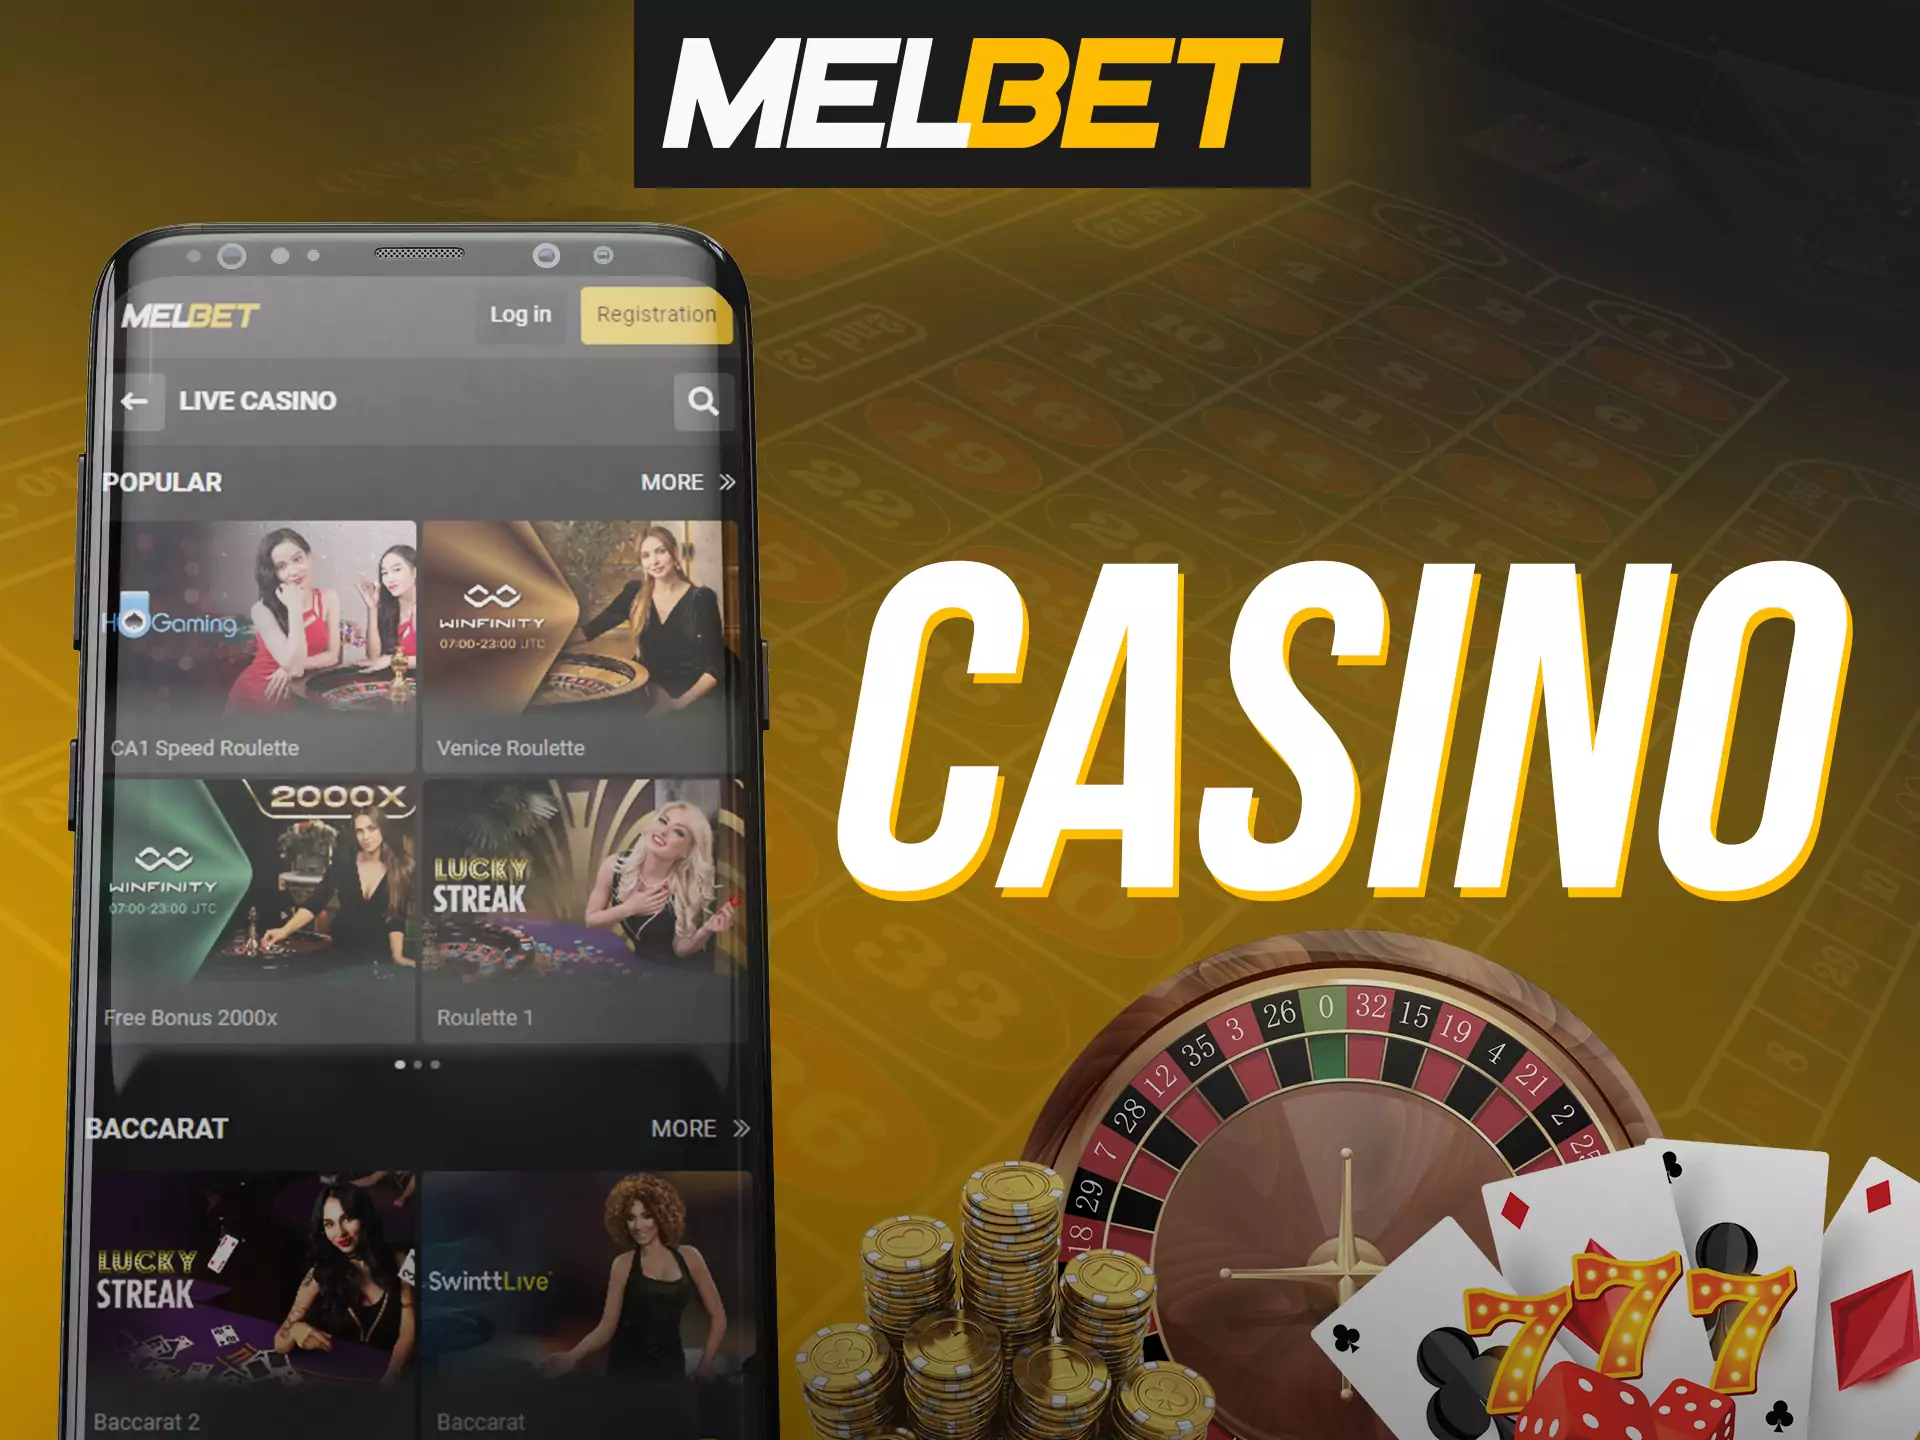 In the Melbet app, visit the casino section.